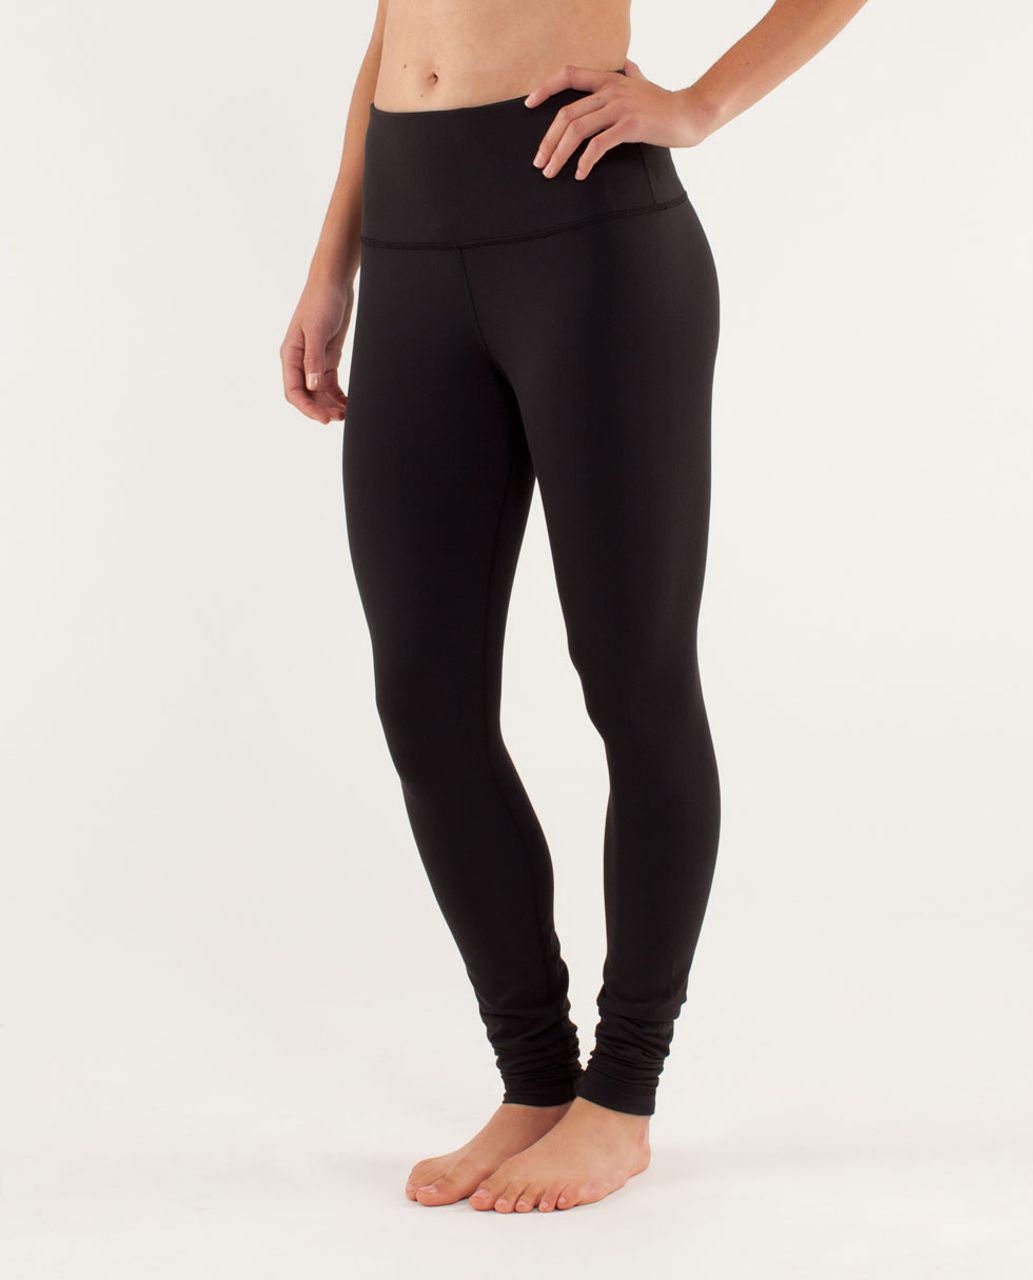 Lululemon Skinny Will Pant size 2 Pique Luon Black NWT High / Low Rise  Legging 